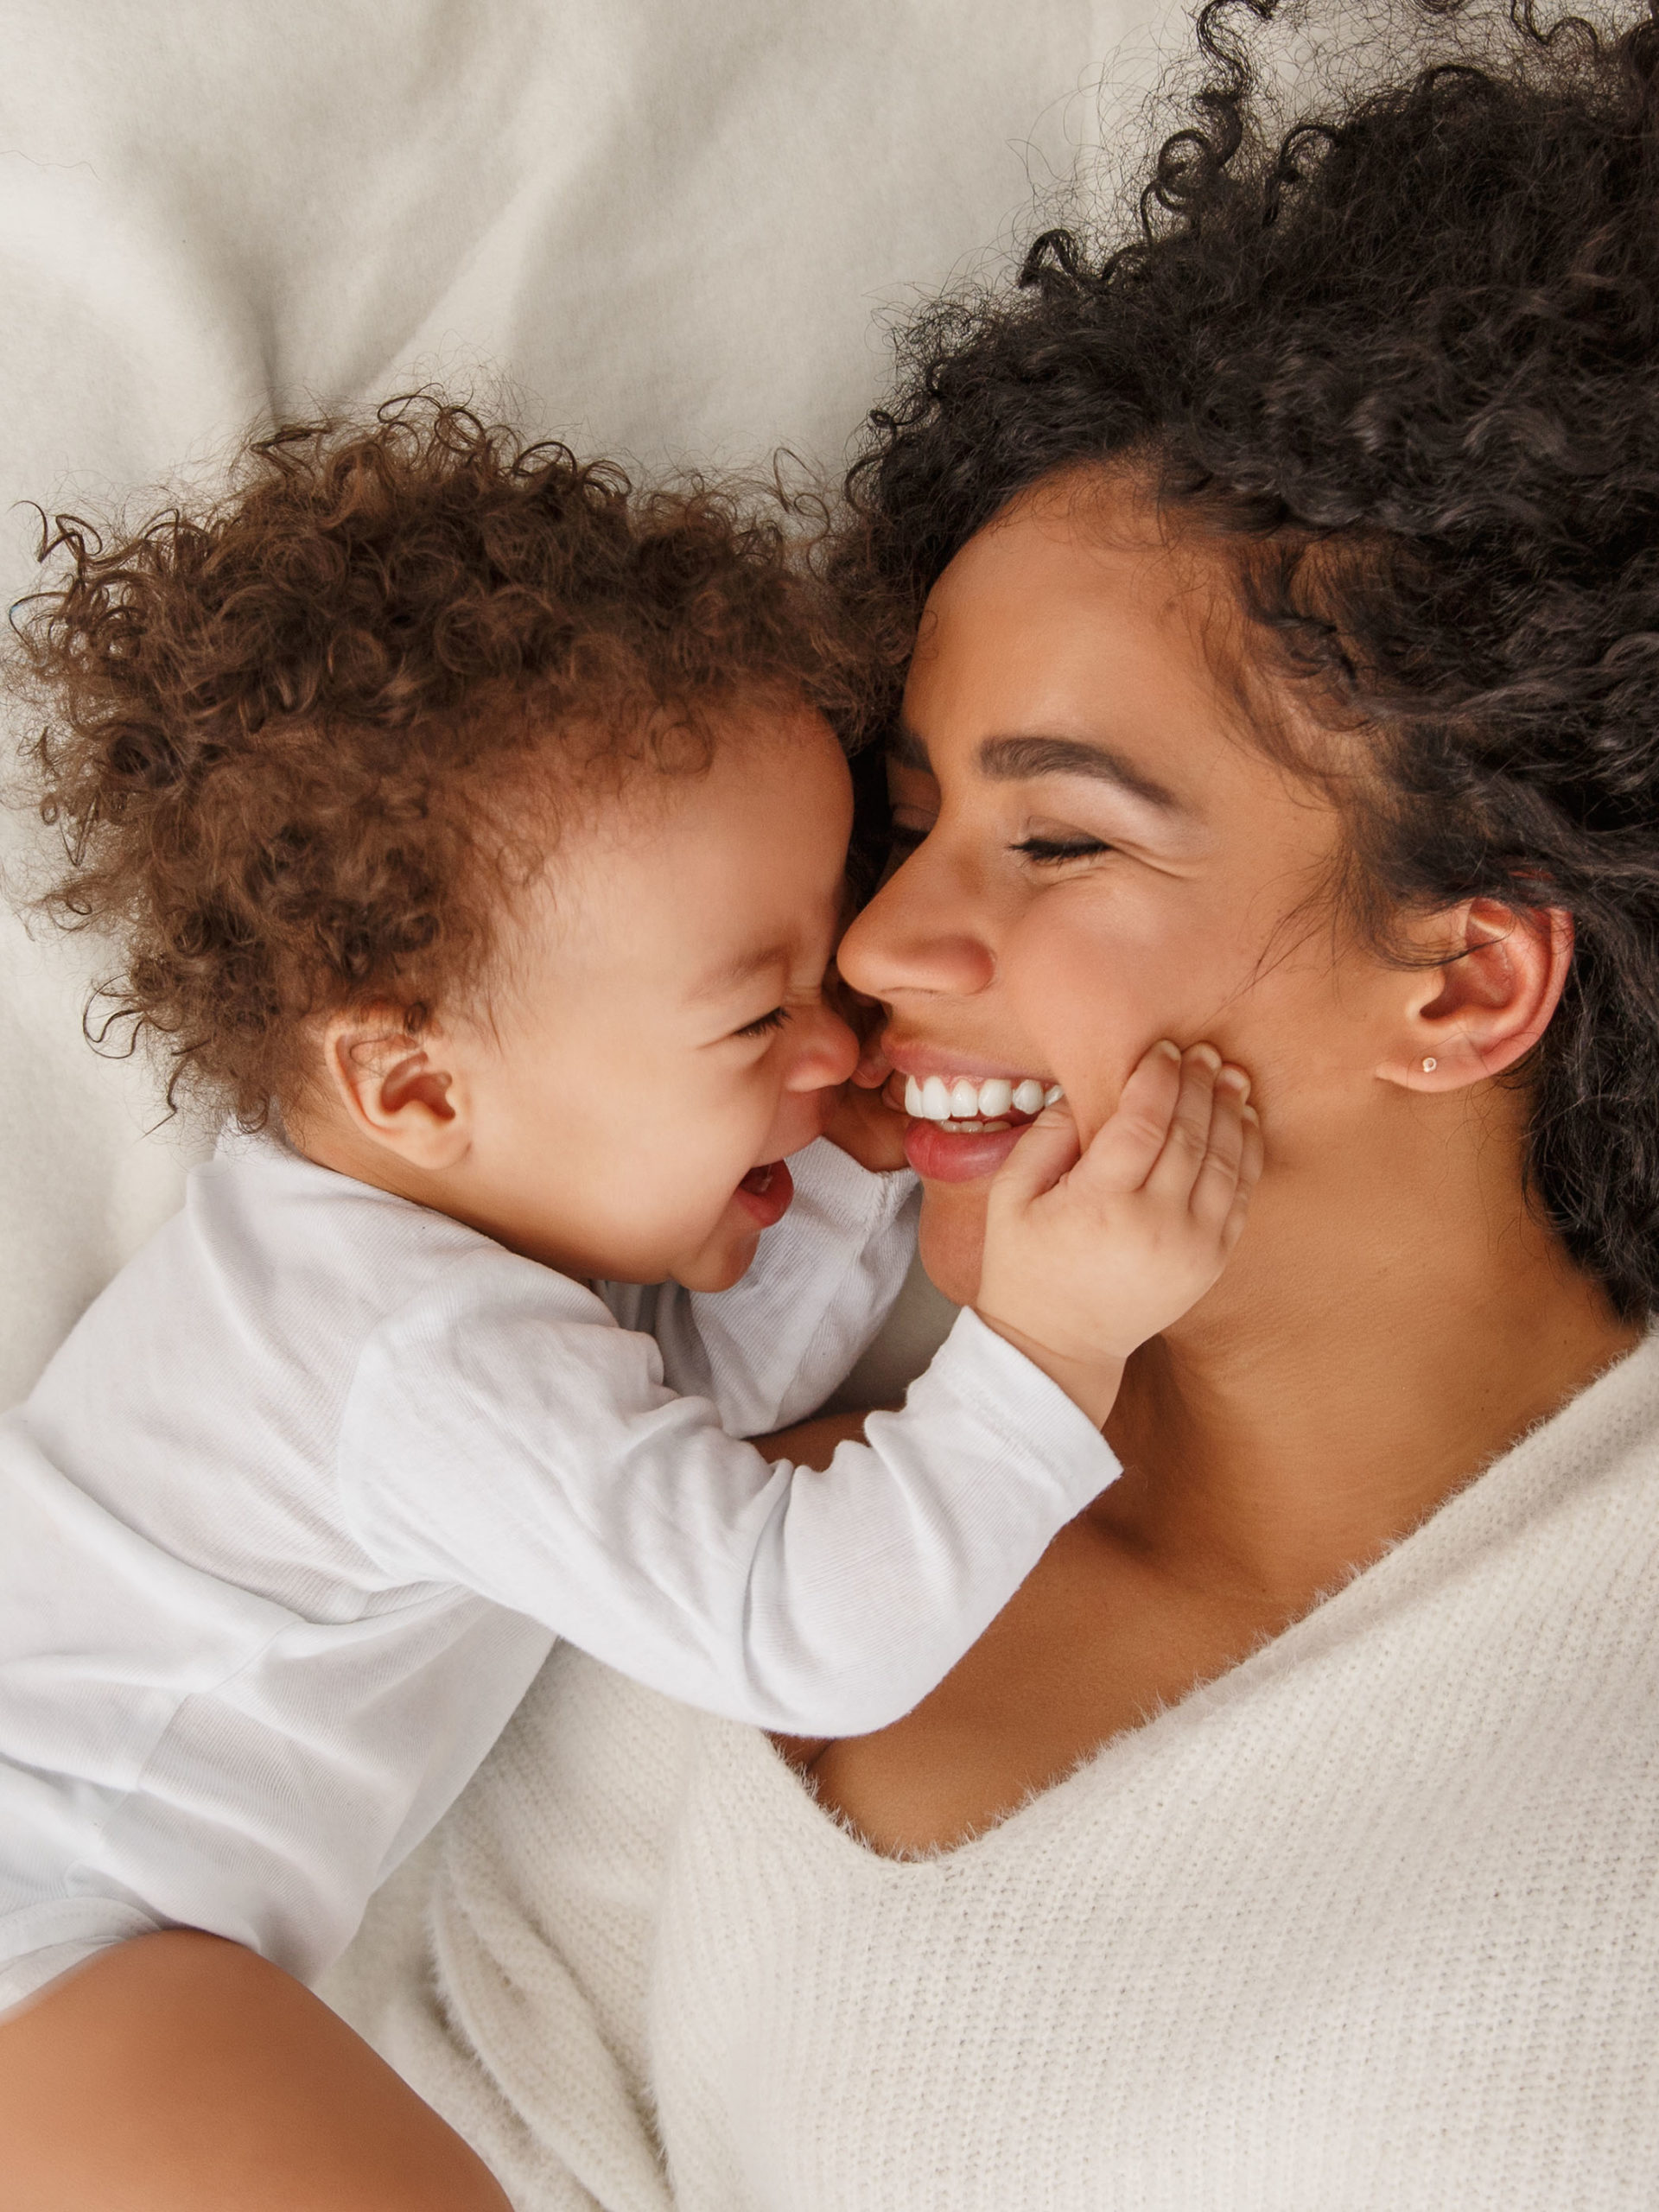 mother and baby smiling and cuddling face to face in bed